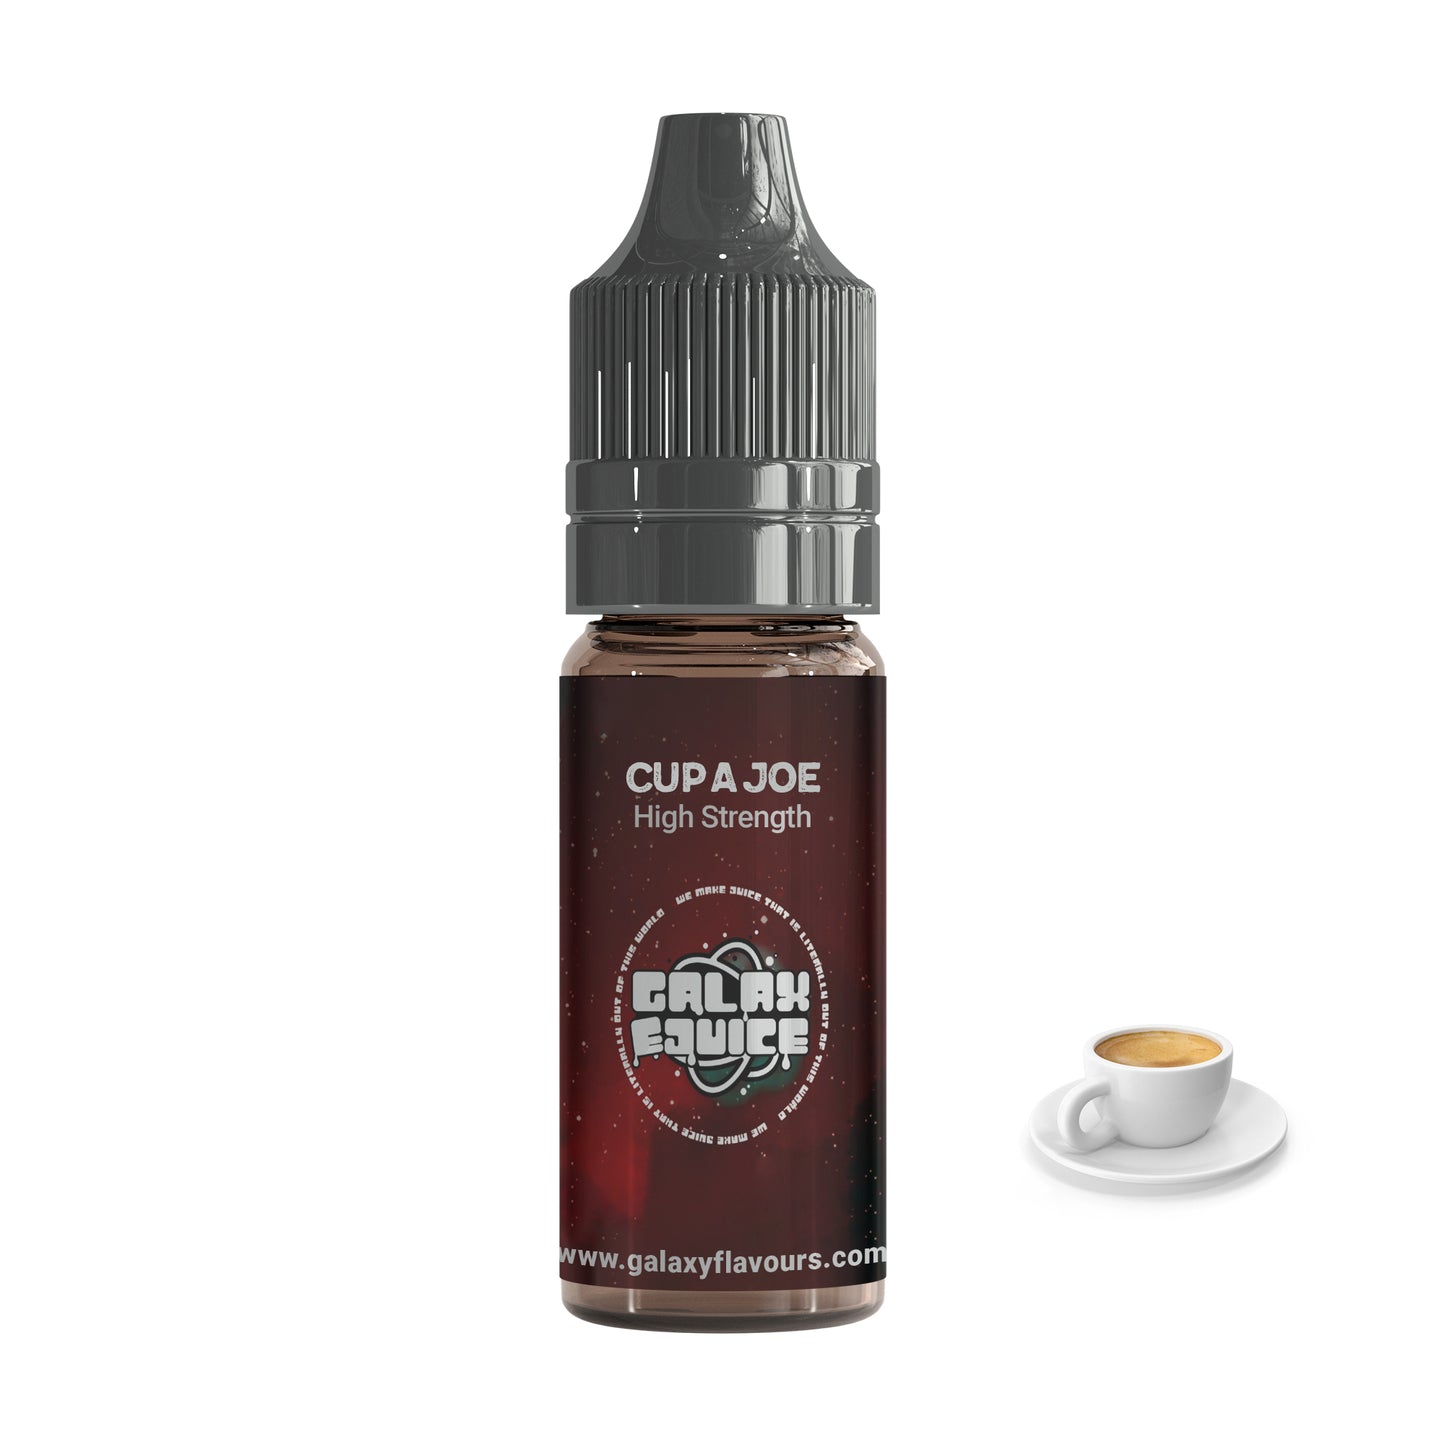 Cup a Joe High Strength Professional Flavouring.